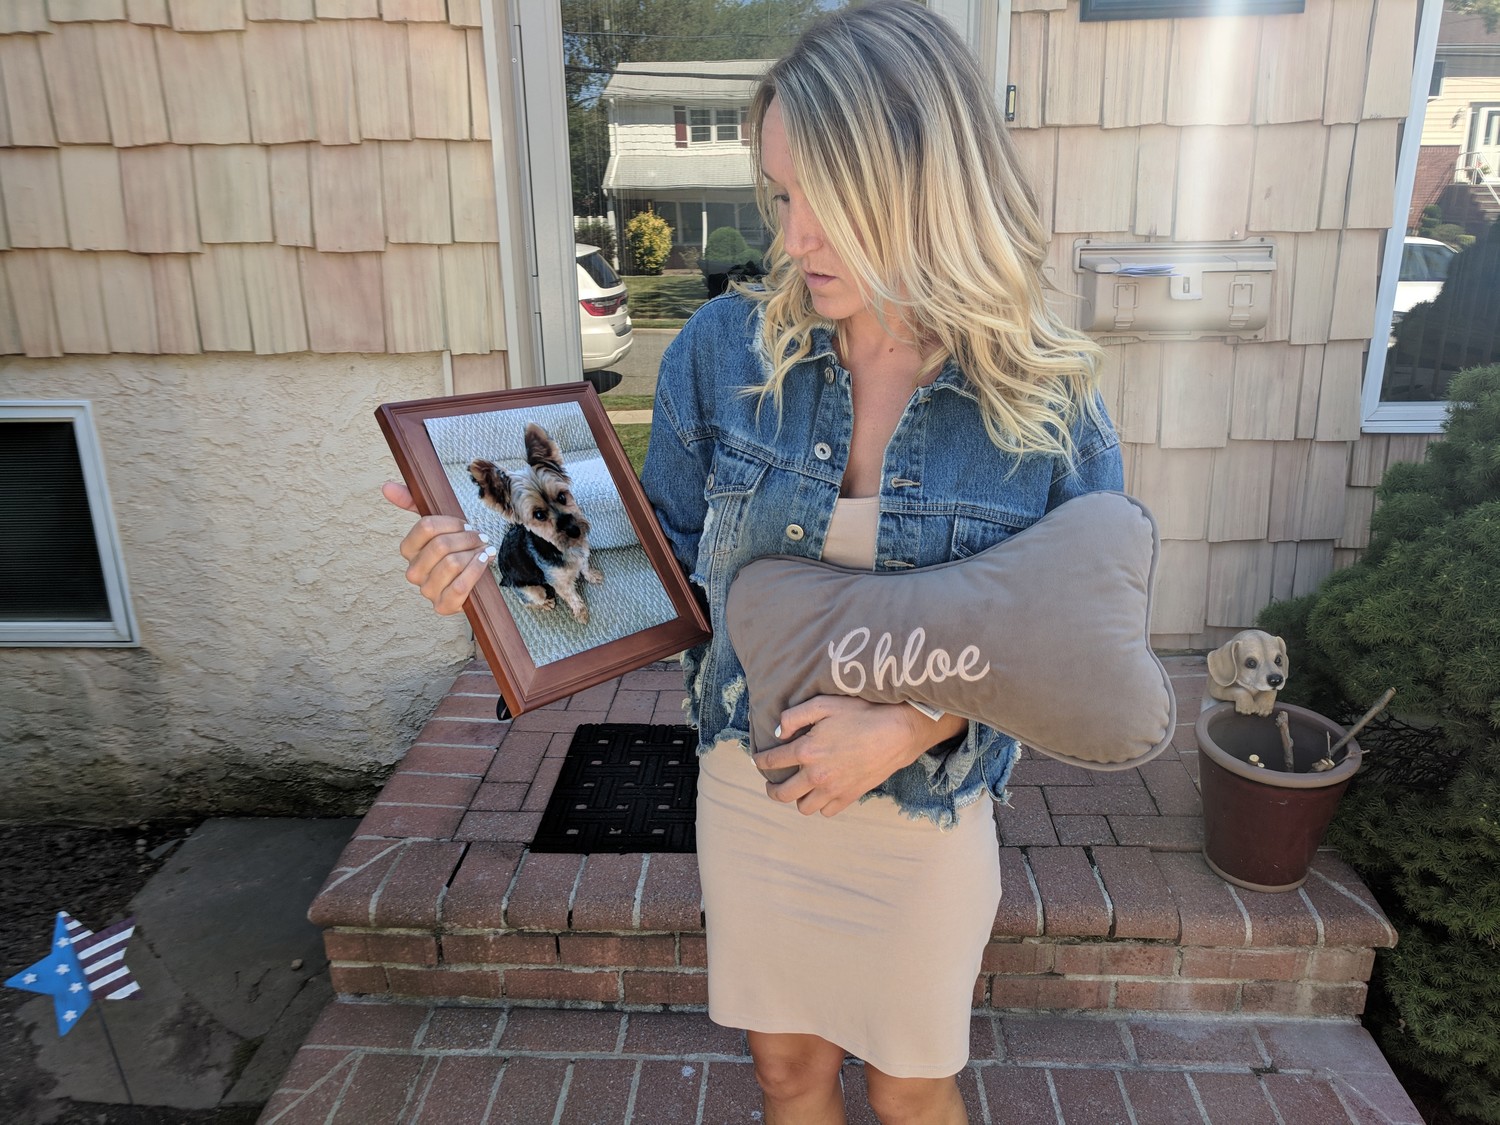 Chelsea Mann of Oceanside with a photo of her Yorkshire terrier, Chloe, who was allegedly mauled to death by her neighbor’s pit bull two weeks ago, along with Chloe’s favorite pillow.